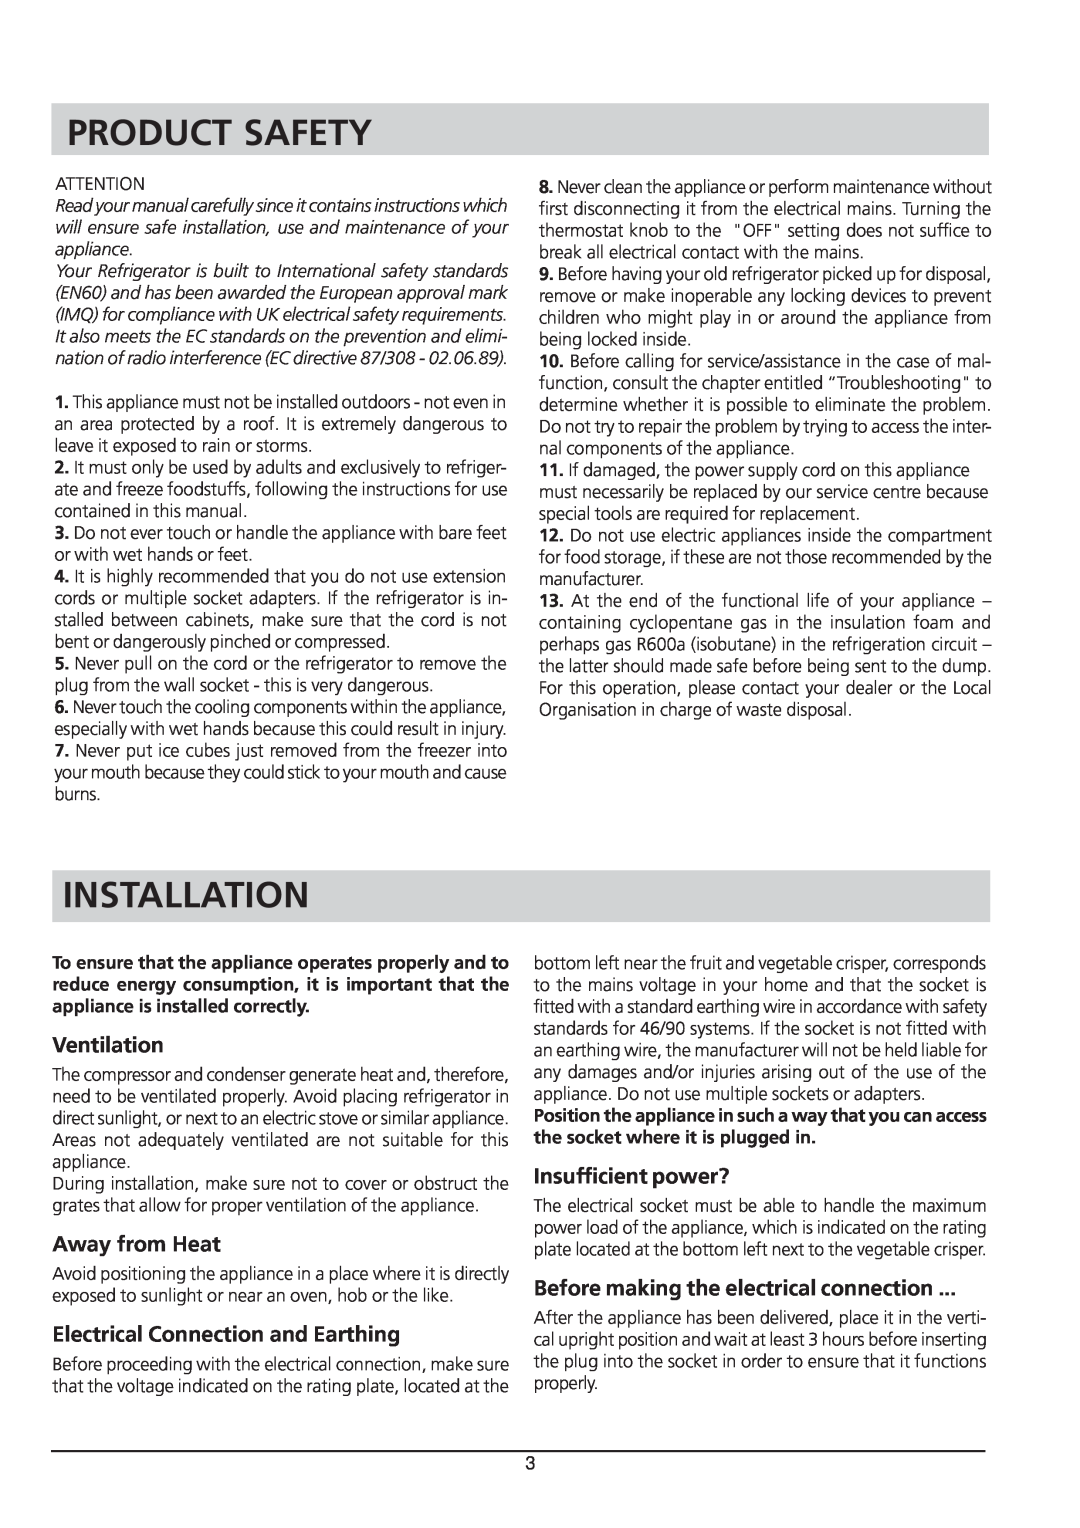 Hotpoint RSA 21 manual Product Safety, Installation, Ventilation, Away from Heat, Electrical Connection and Earthing 